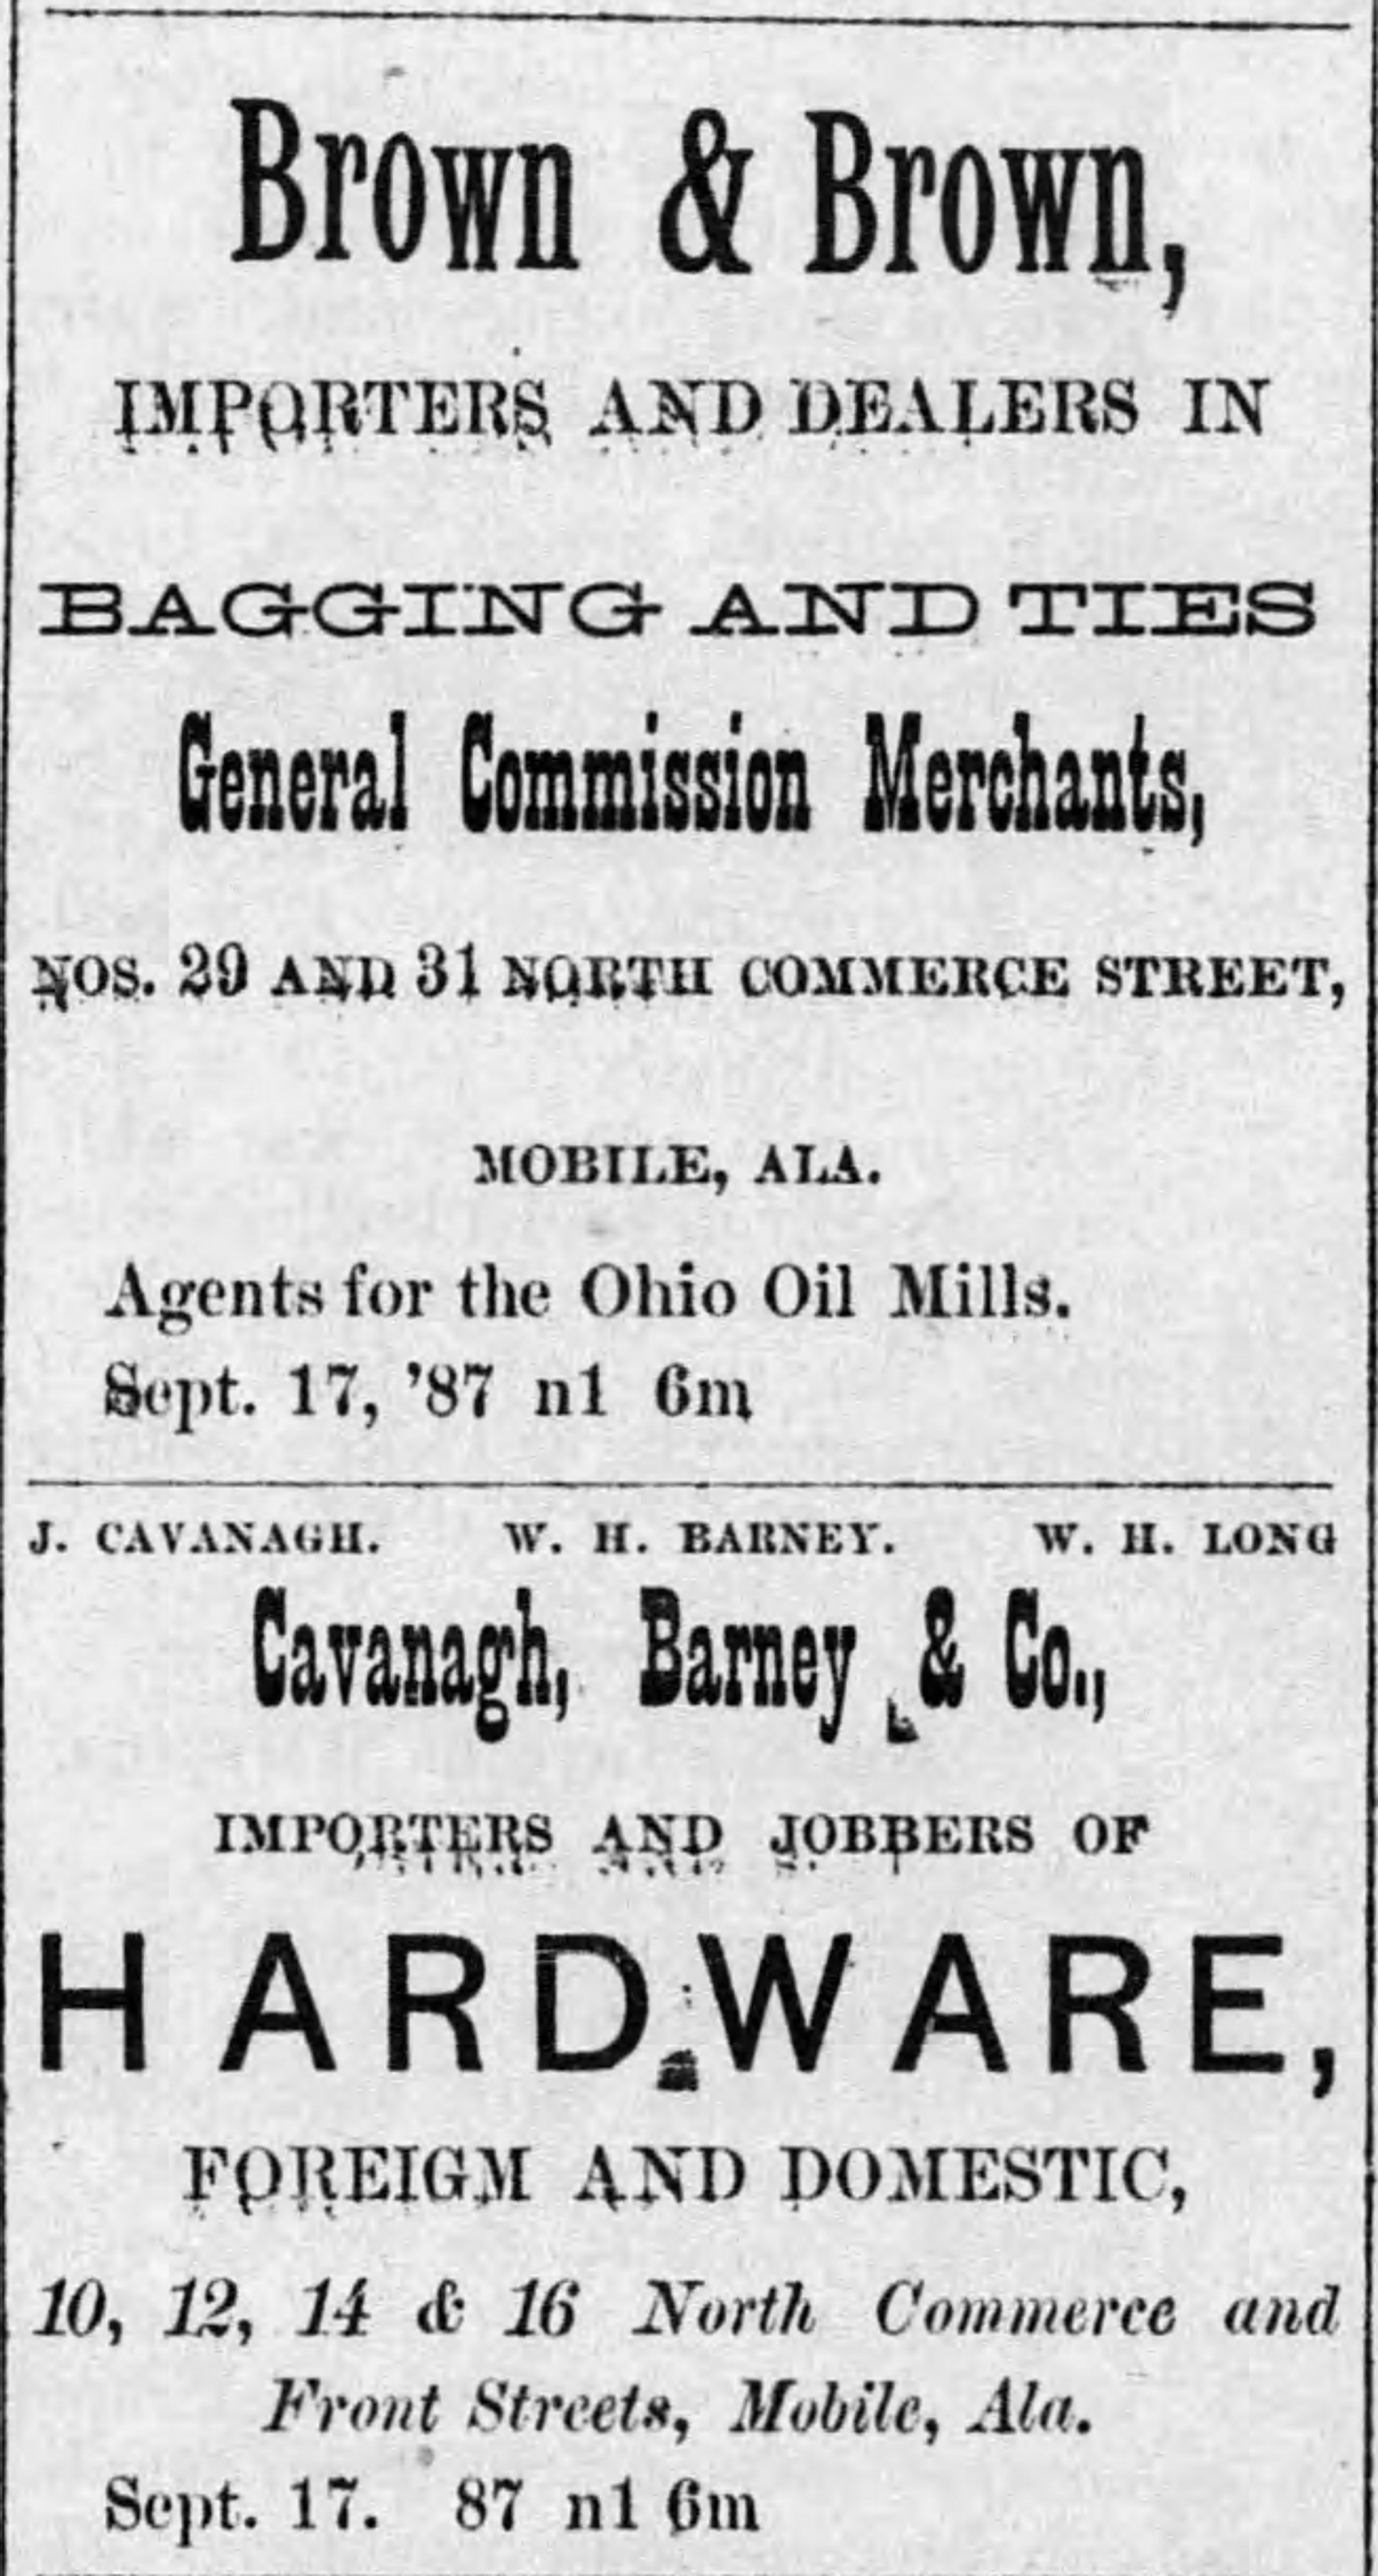 PATRON – Fire at a camp meeting and wheel runs over a man's head were stories in the news in Clarke County in 1887.